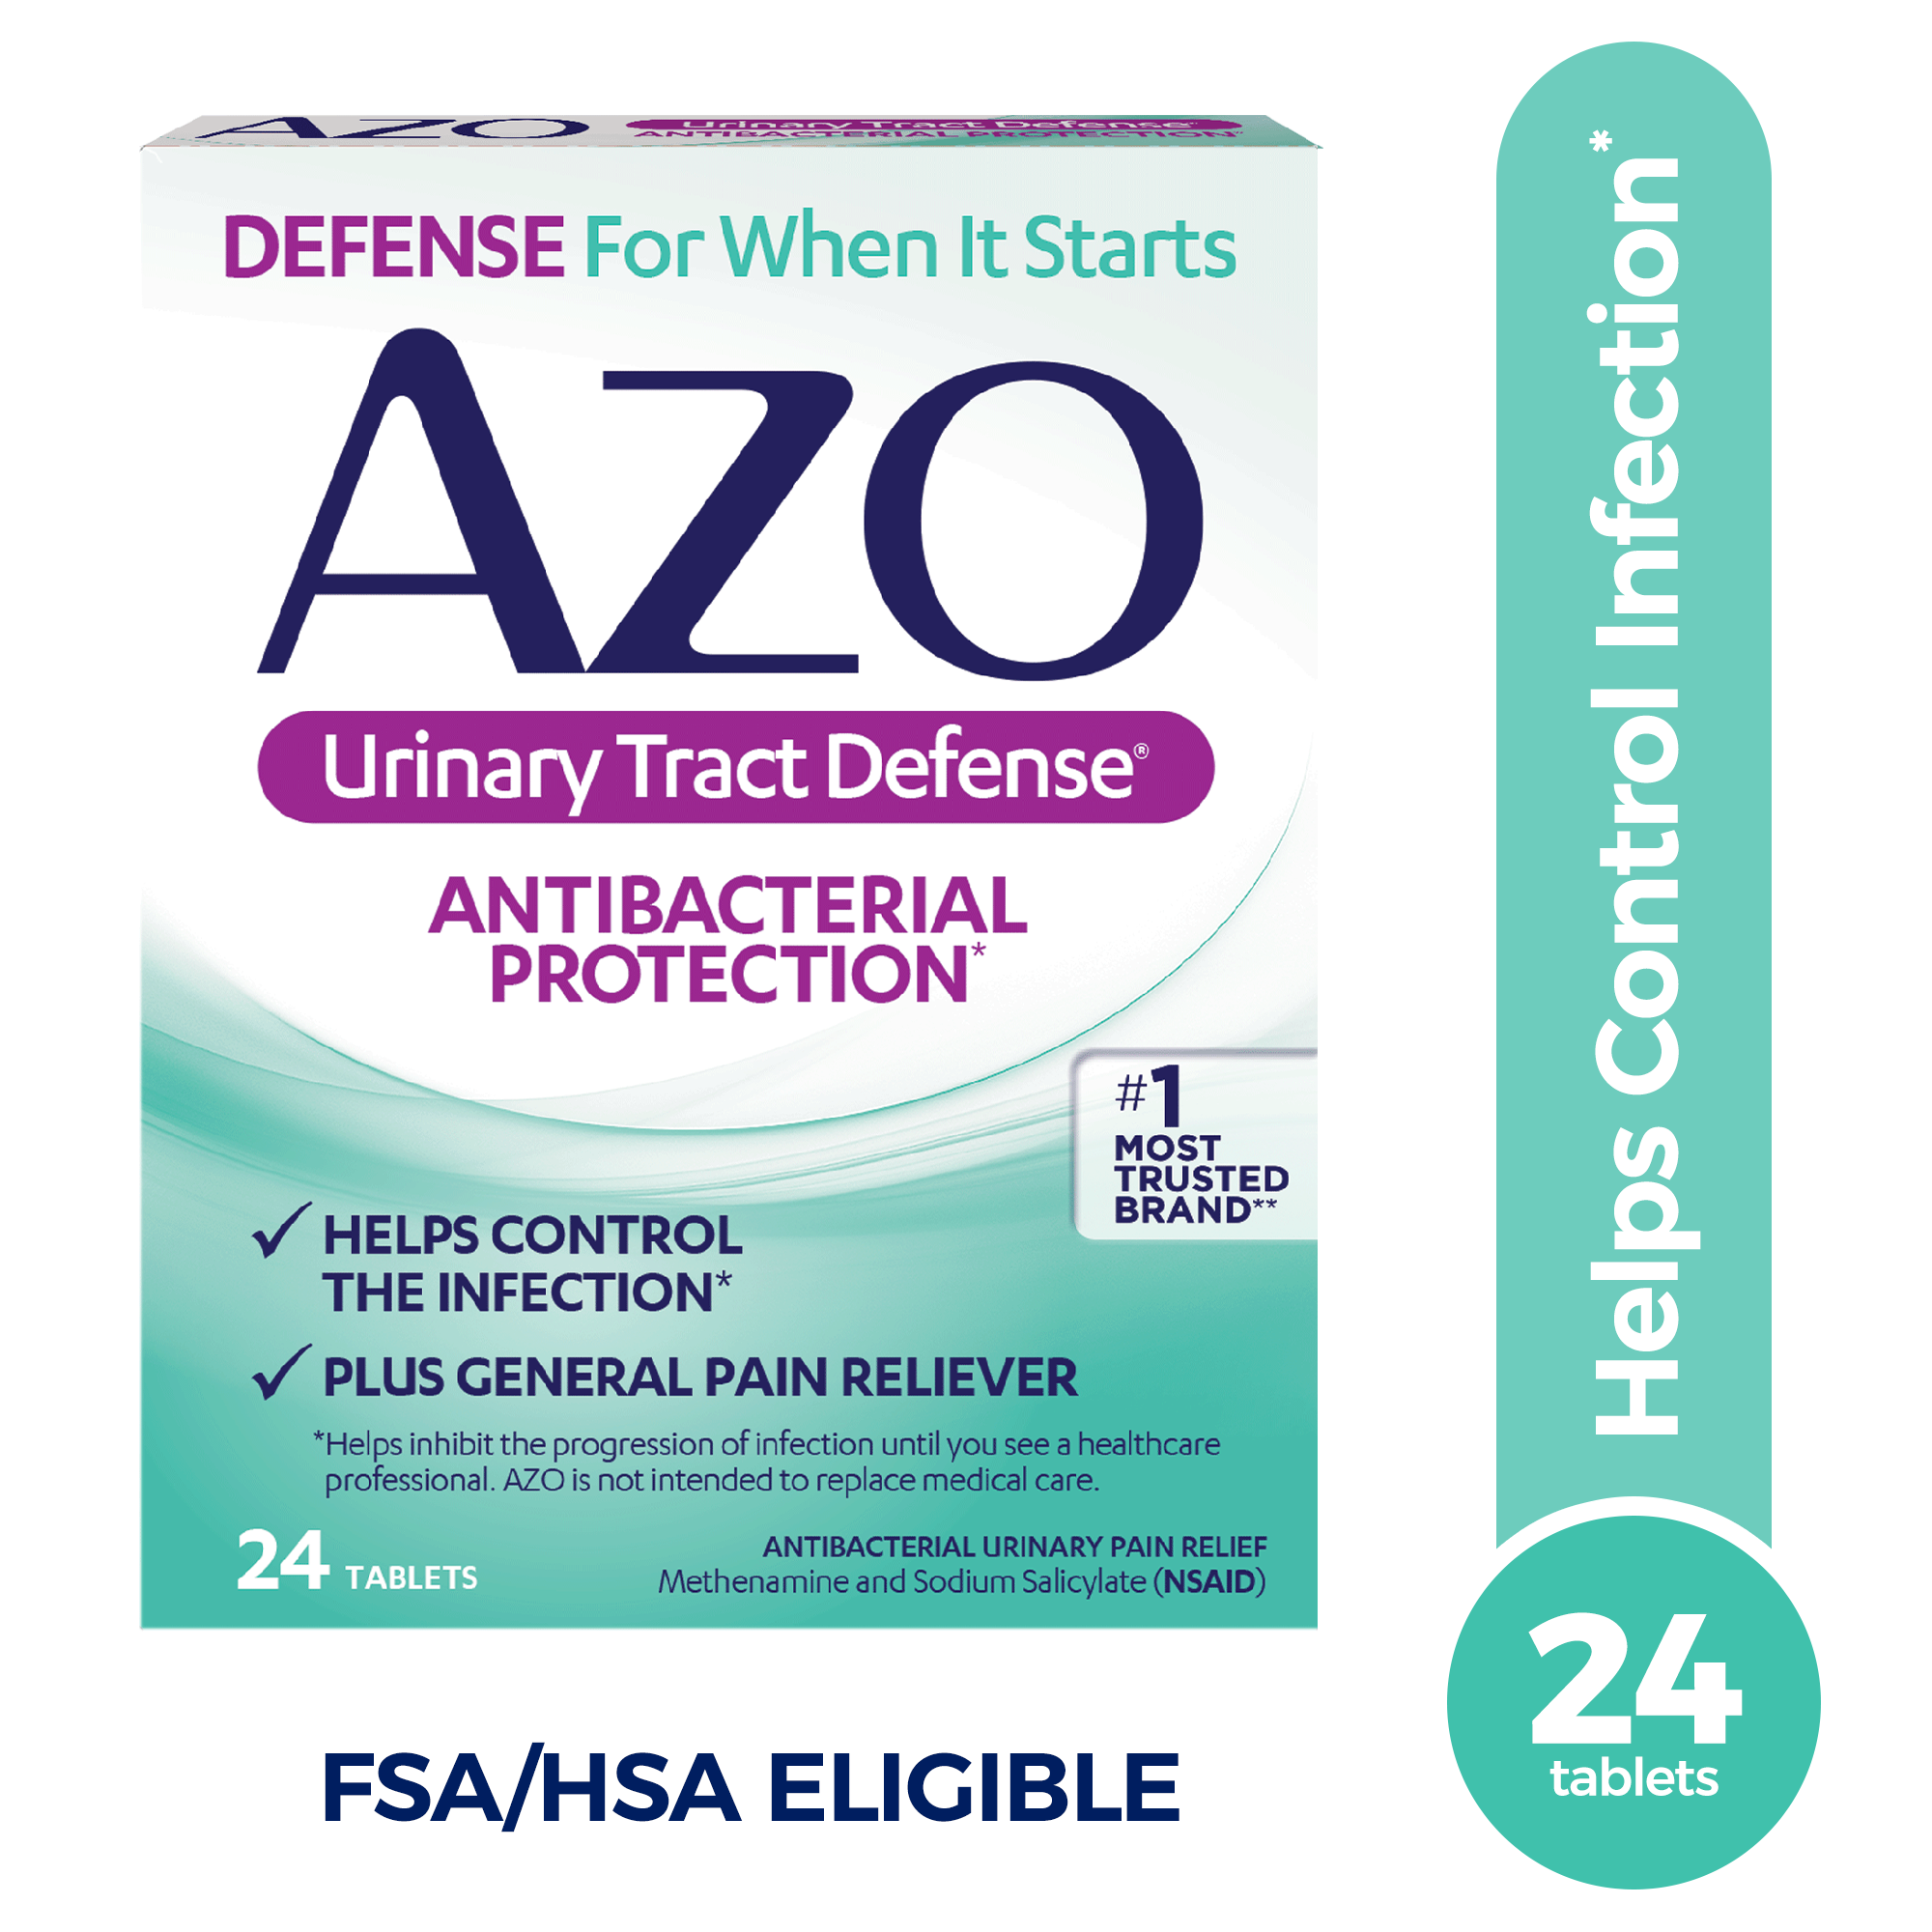 AZO Urinary Tract Defense Antibacterial Protection, 23 oz, 24 Tablets - image 1 of 9